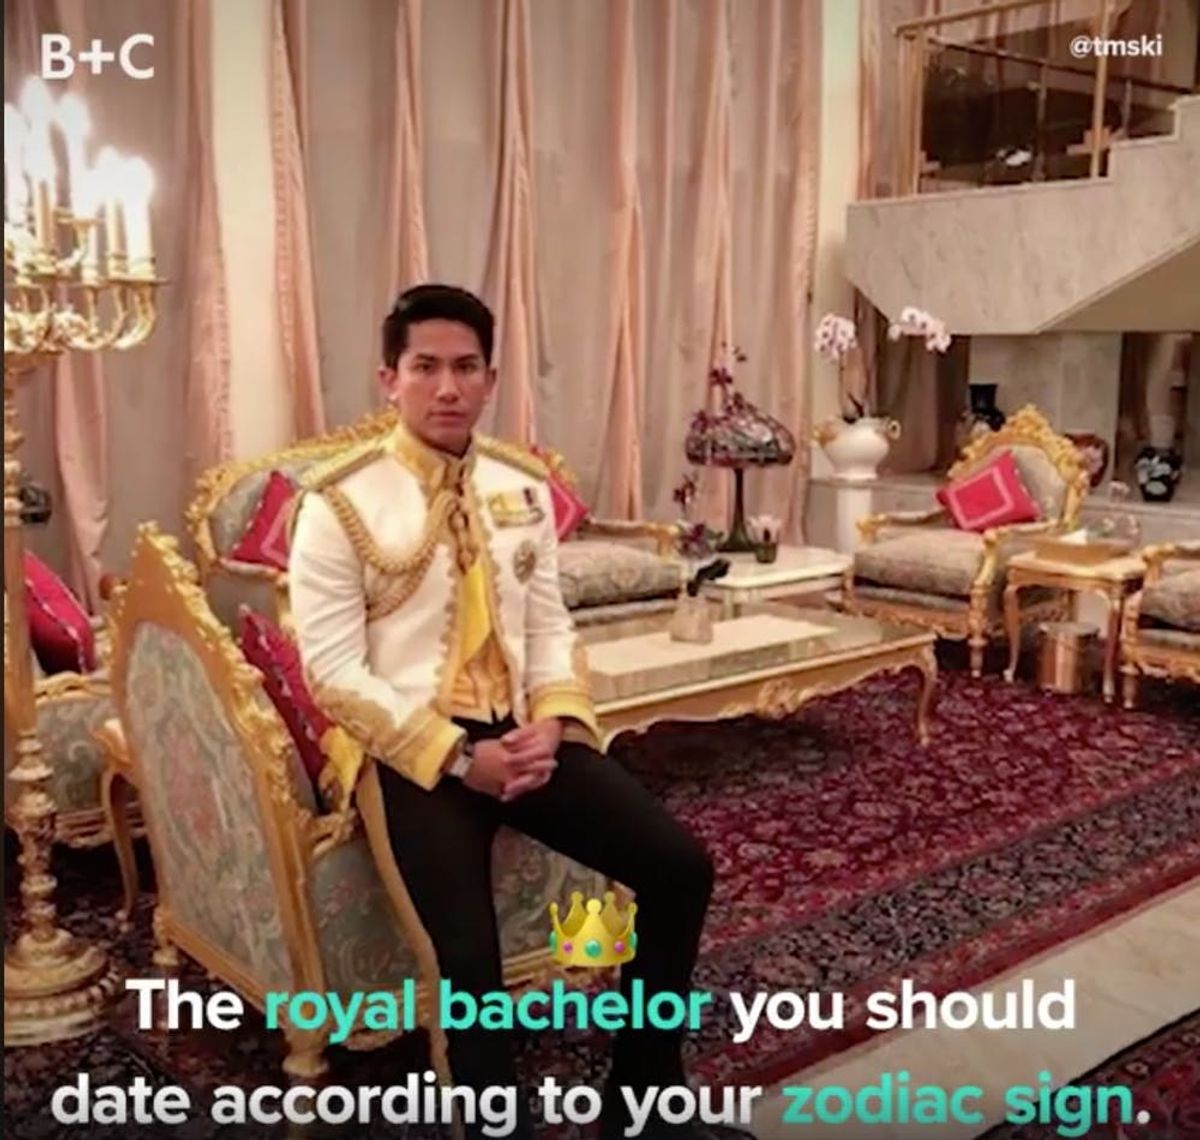 The Royal Bachelor You Should Date, Based on Your Zodiac Sign